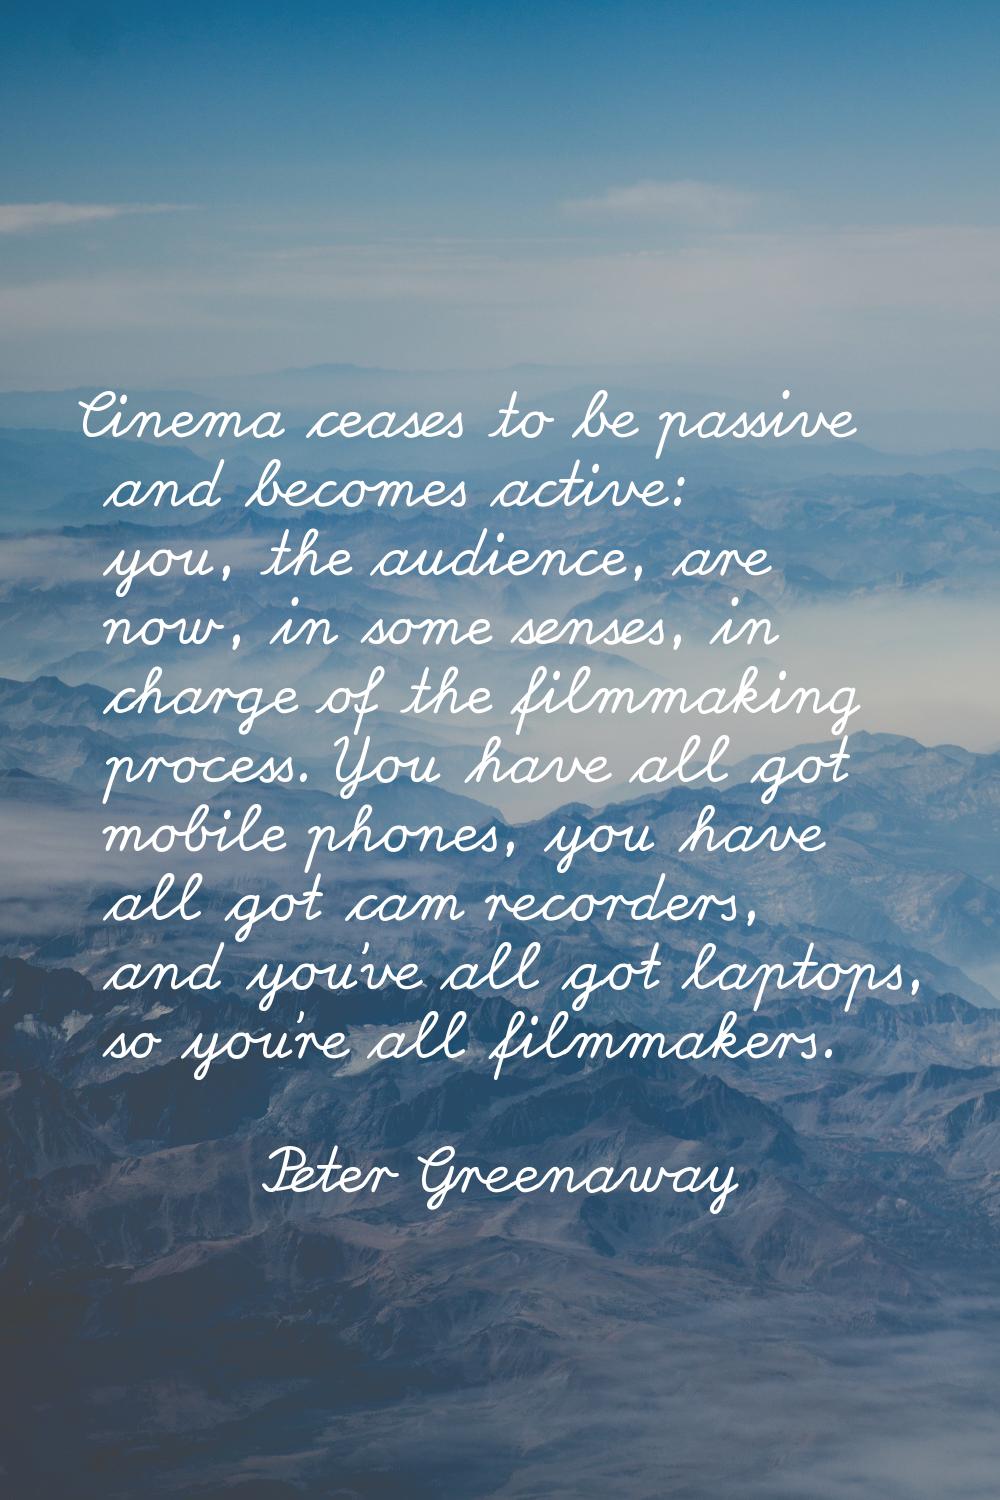 Cinema ceases to be passive and becomes active: you, the audience, are now, in some senses, in char